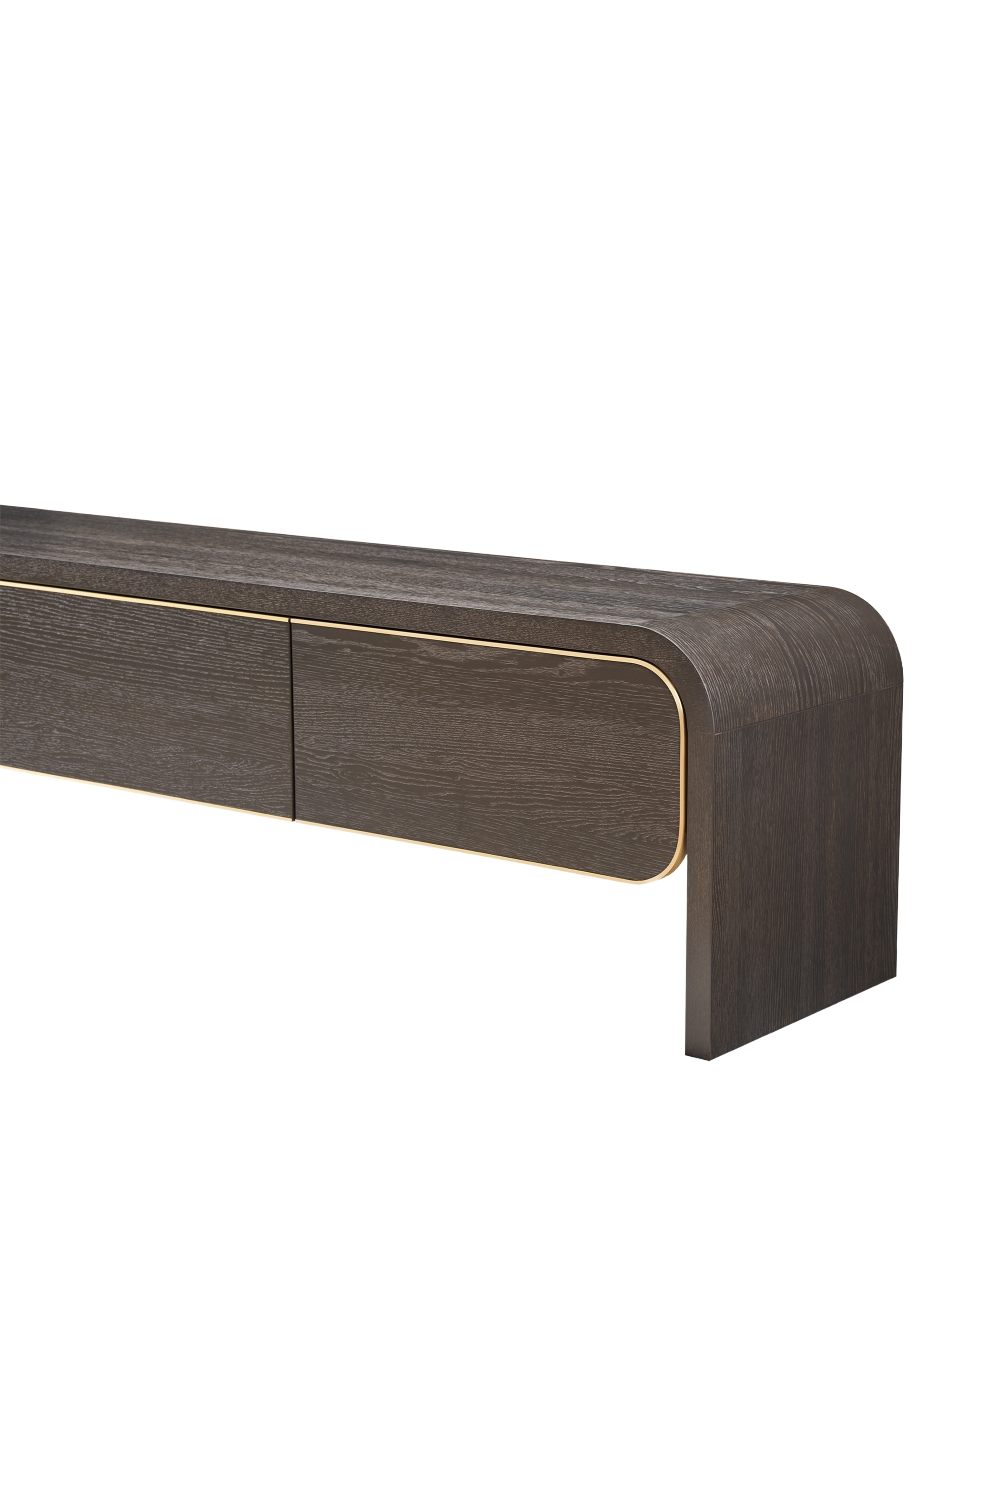 Wooden 3-Drawer Media Sideboard | Liang & Eimil Walter | Oroa.com